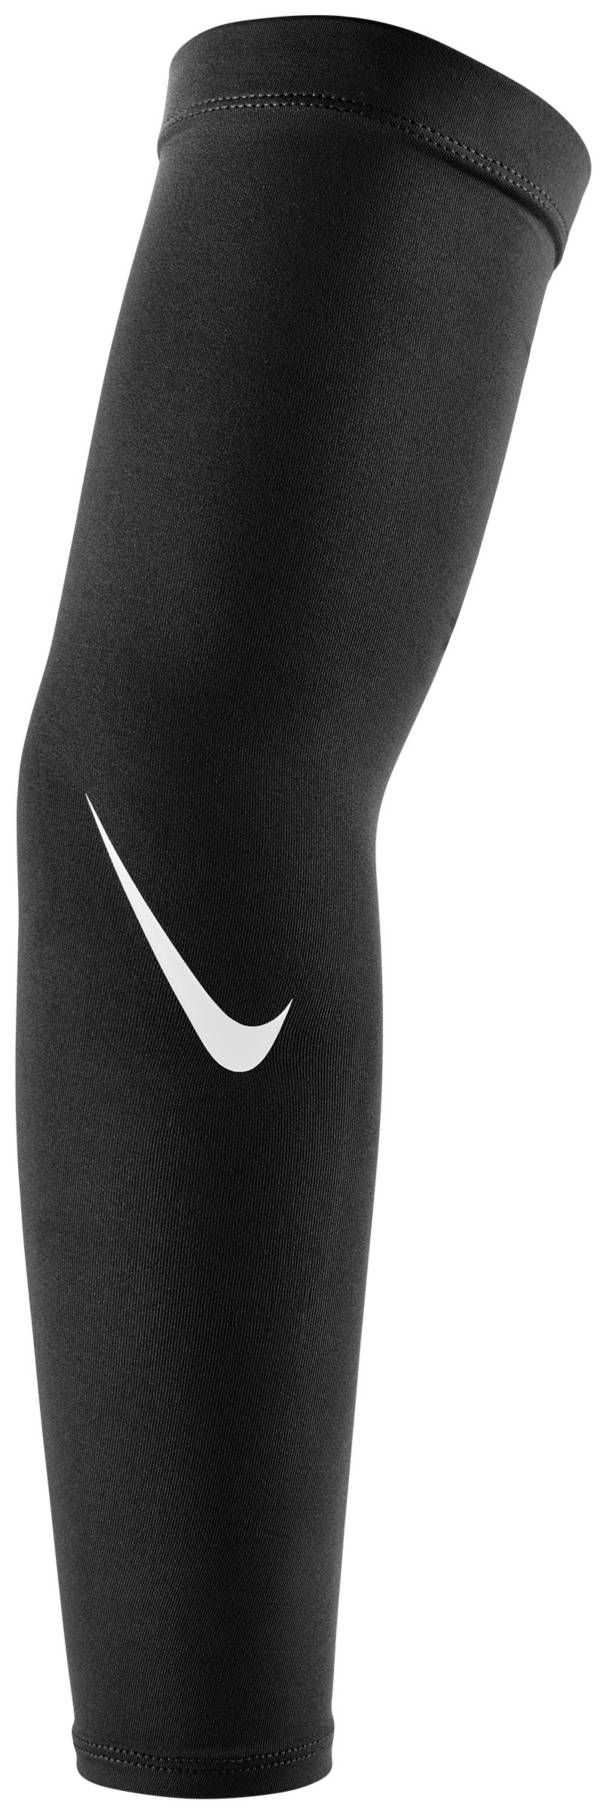 Nike Pro Adult Dri-FIT 4.0 Arm Sleeves product image